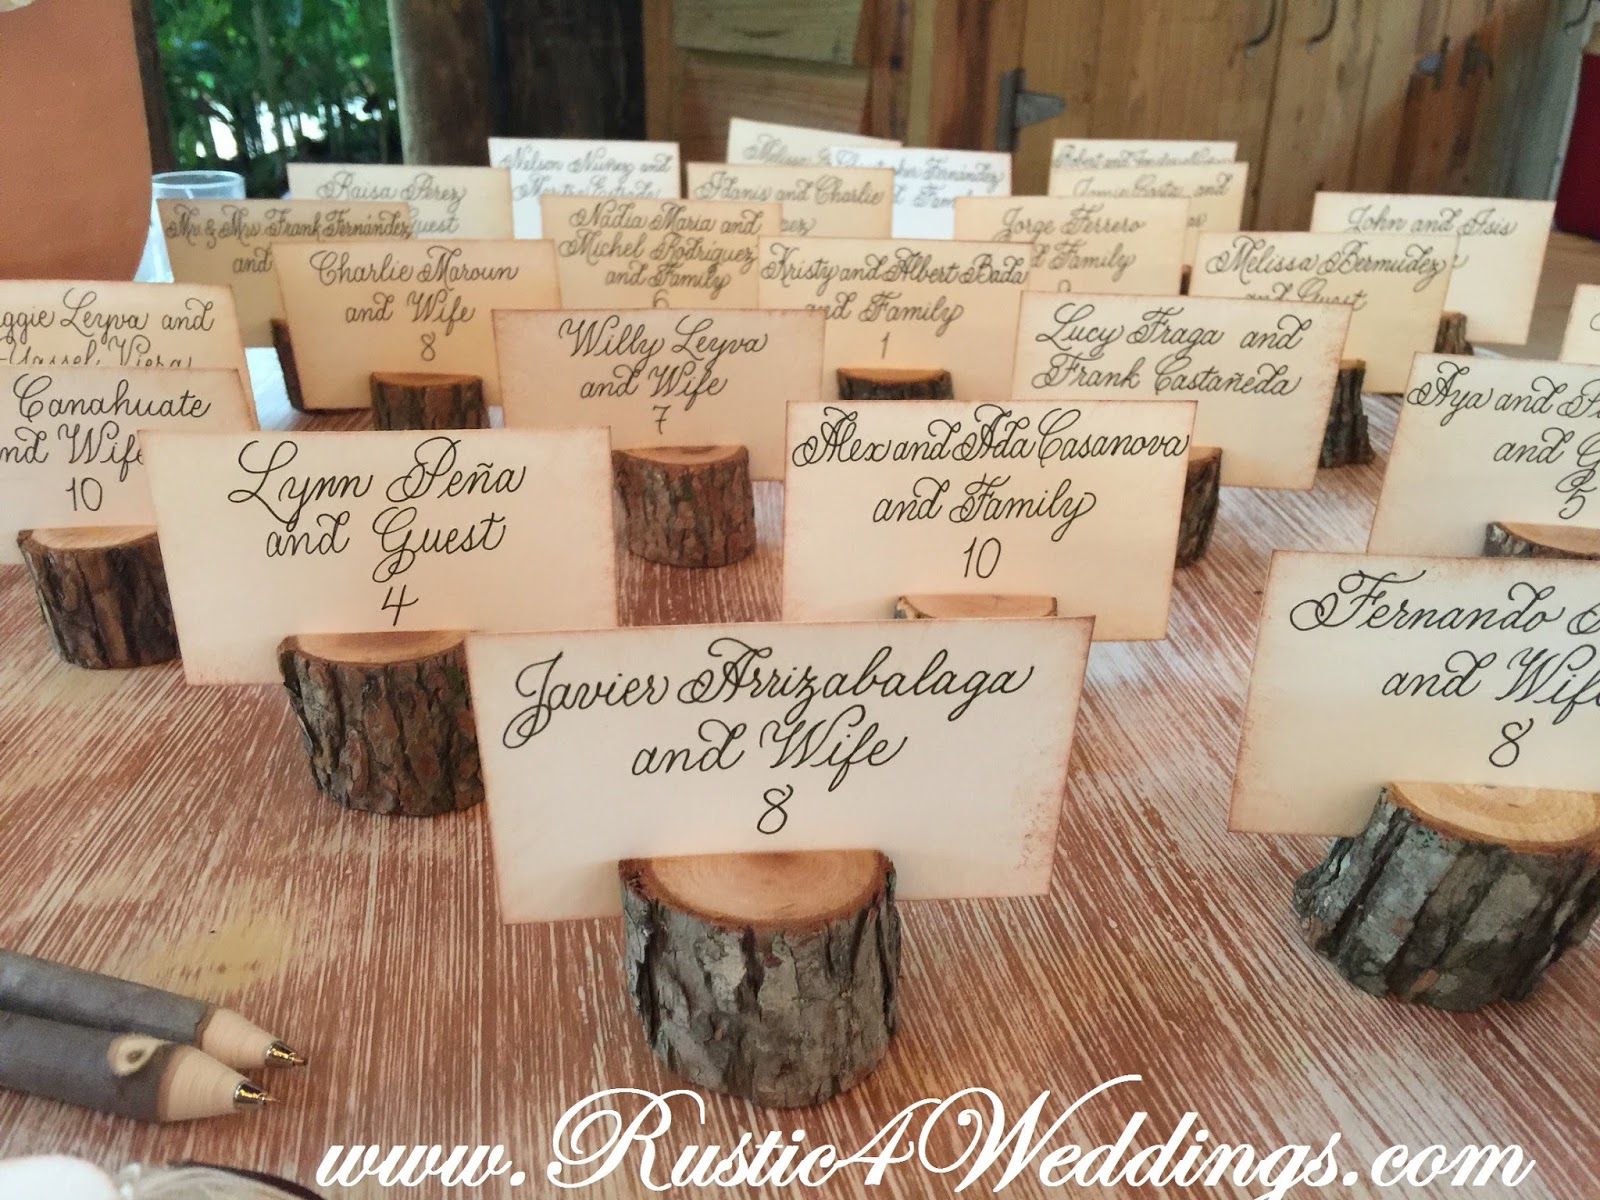 Gorgeous Rustic Beach Theme Wedding Featuring Our Tree Branch